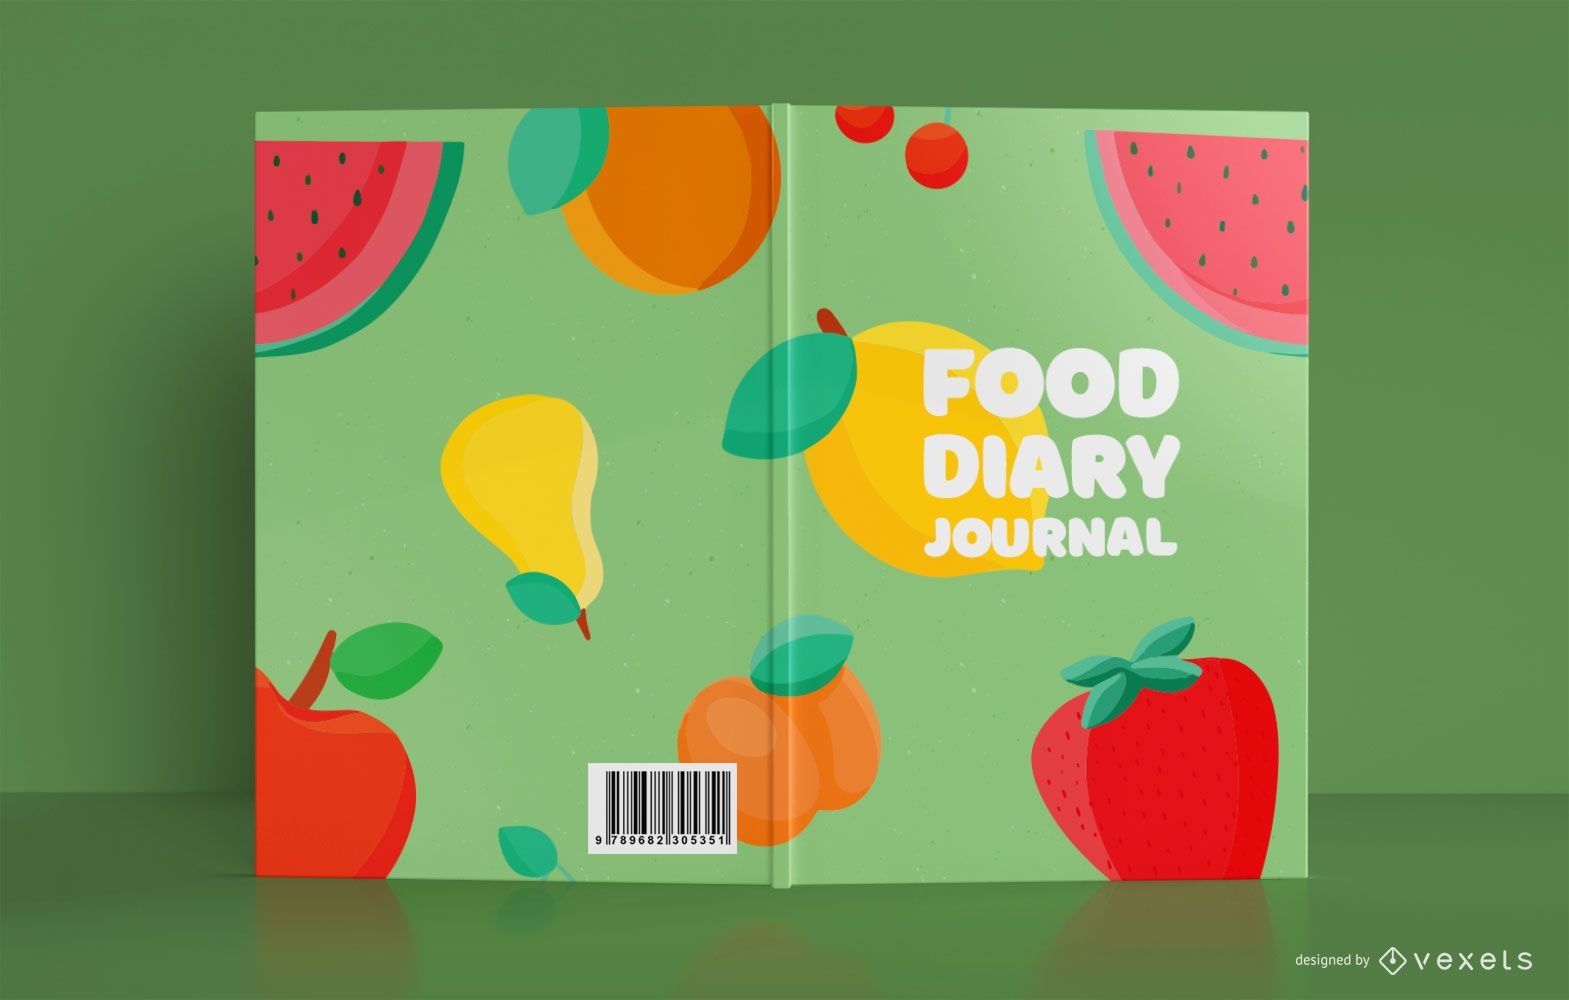 Food Diary Journal Cover Design